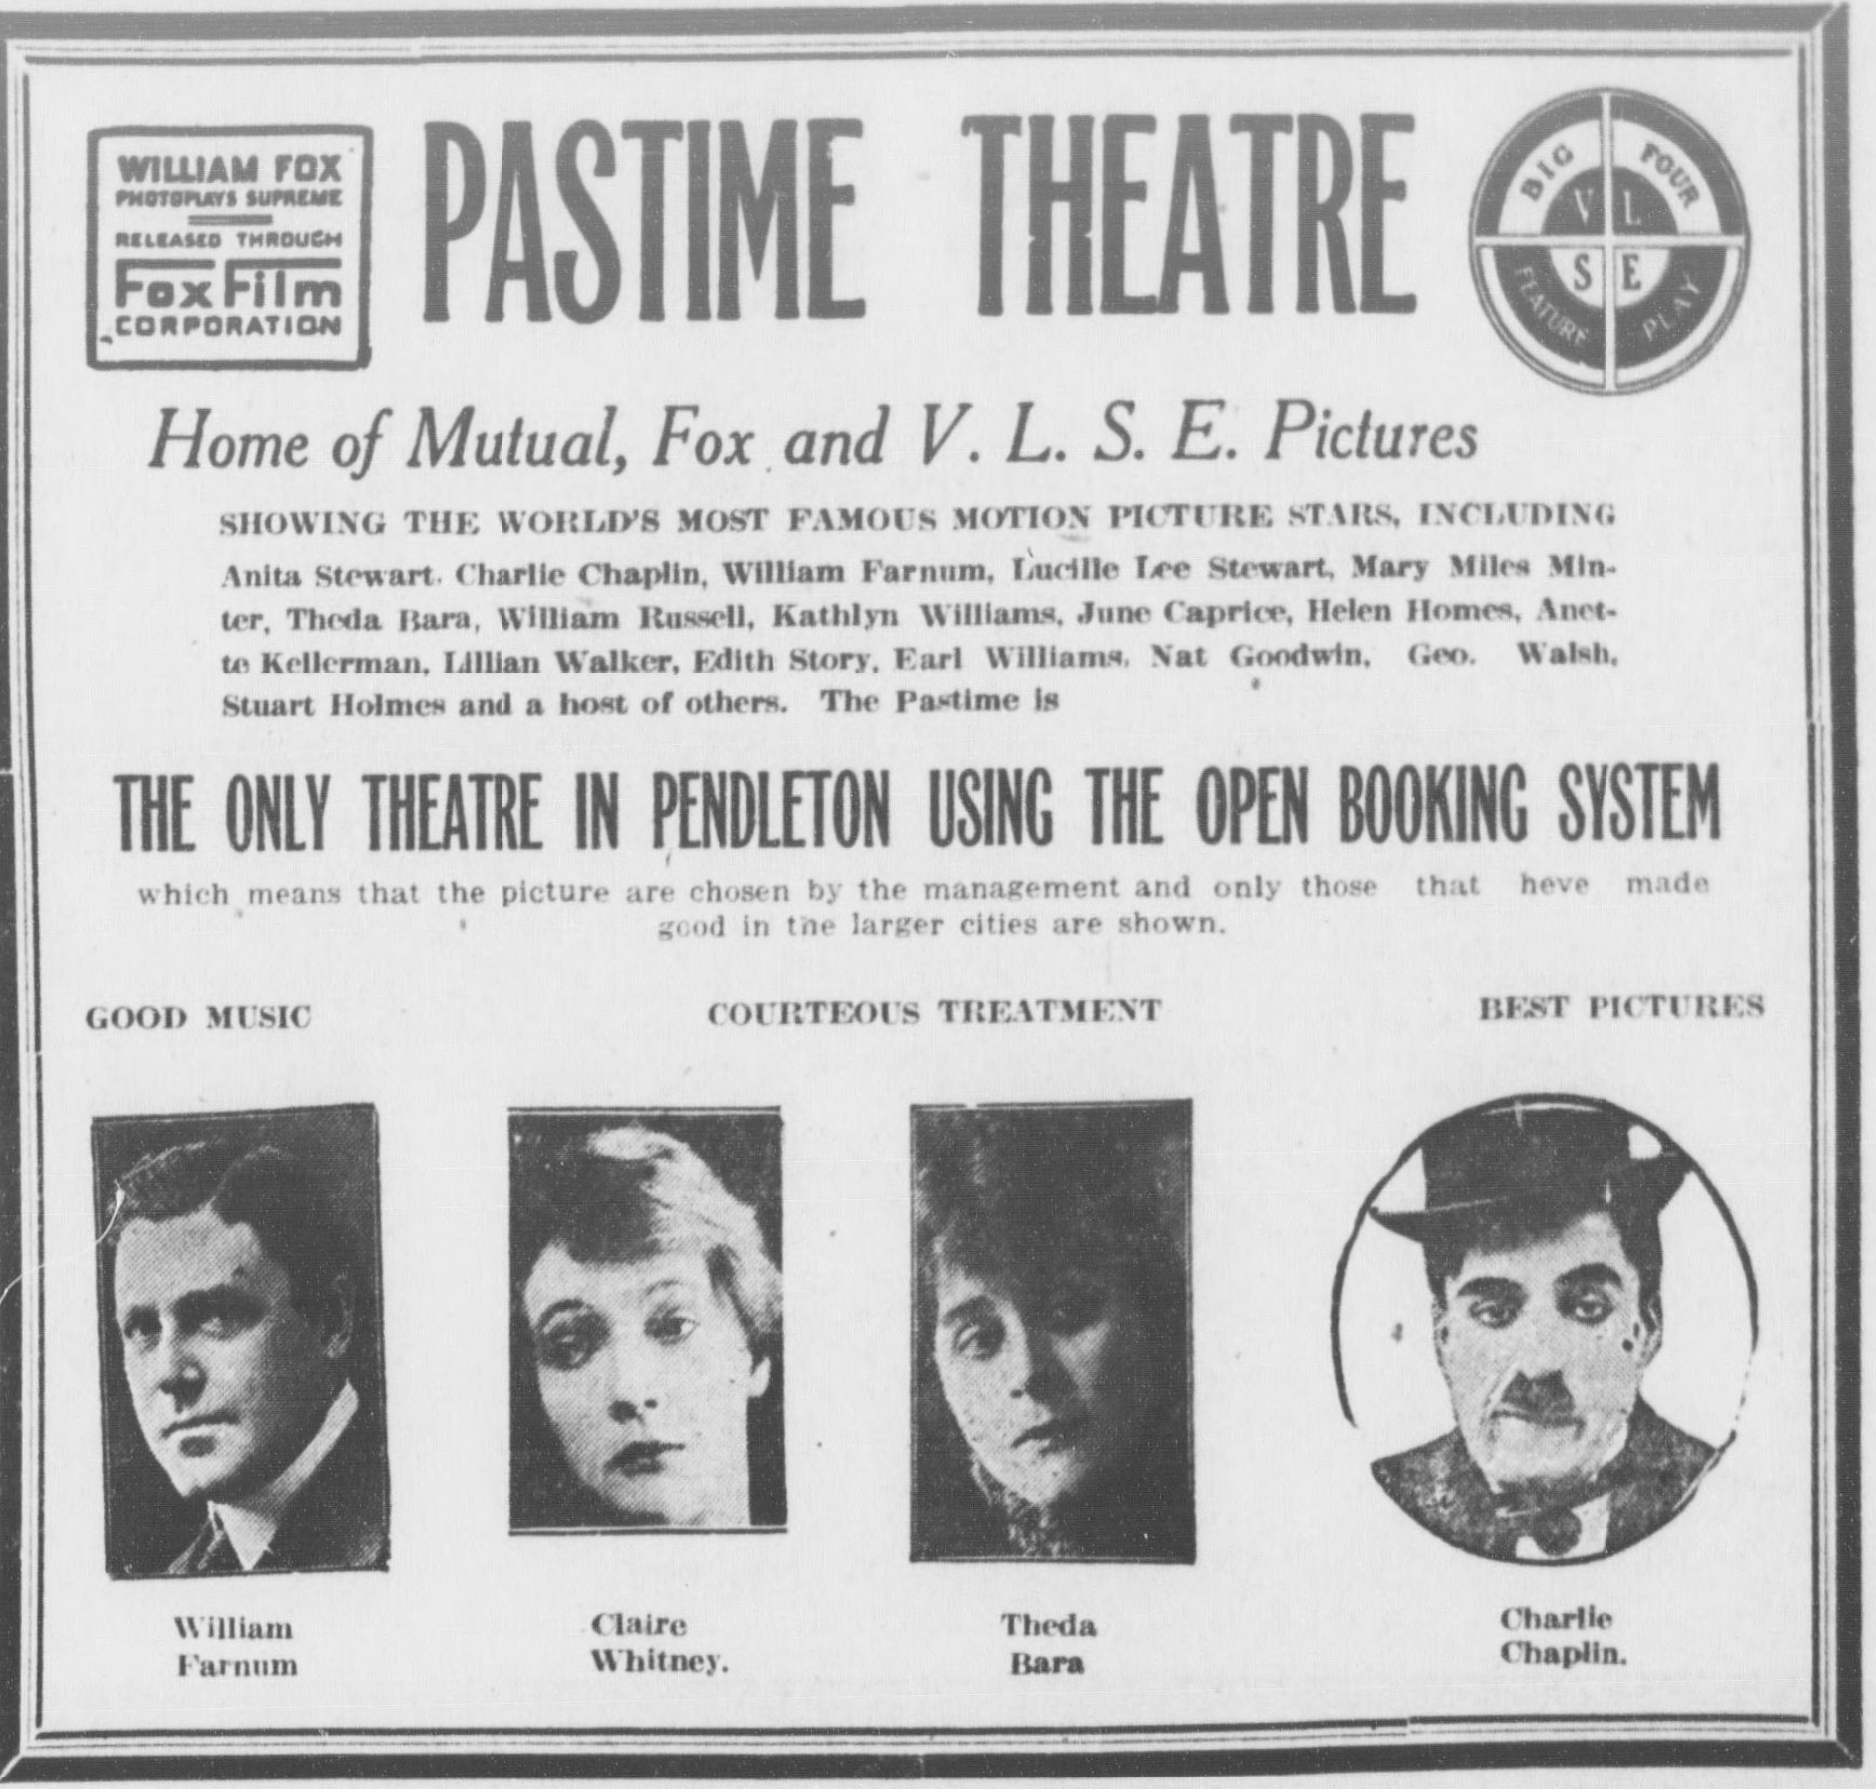 Pastime theater ad, 1916